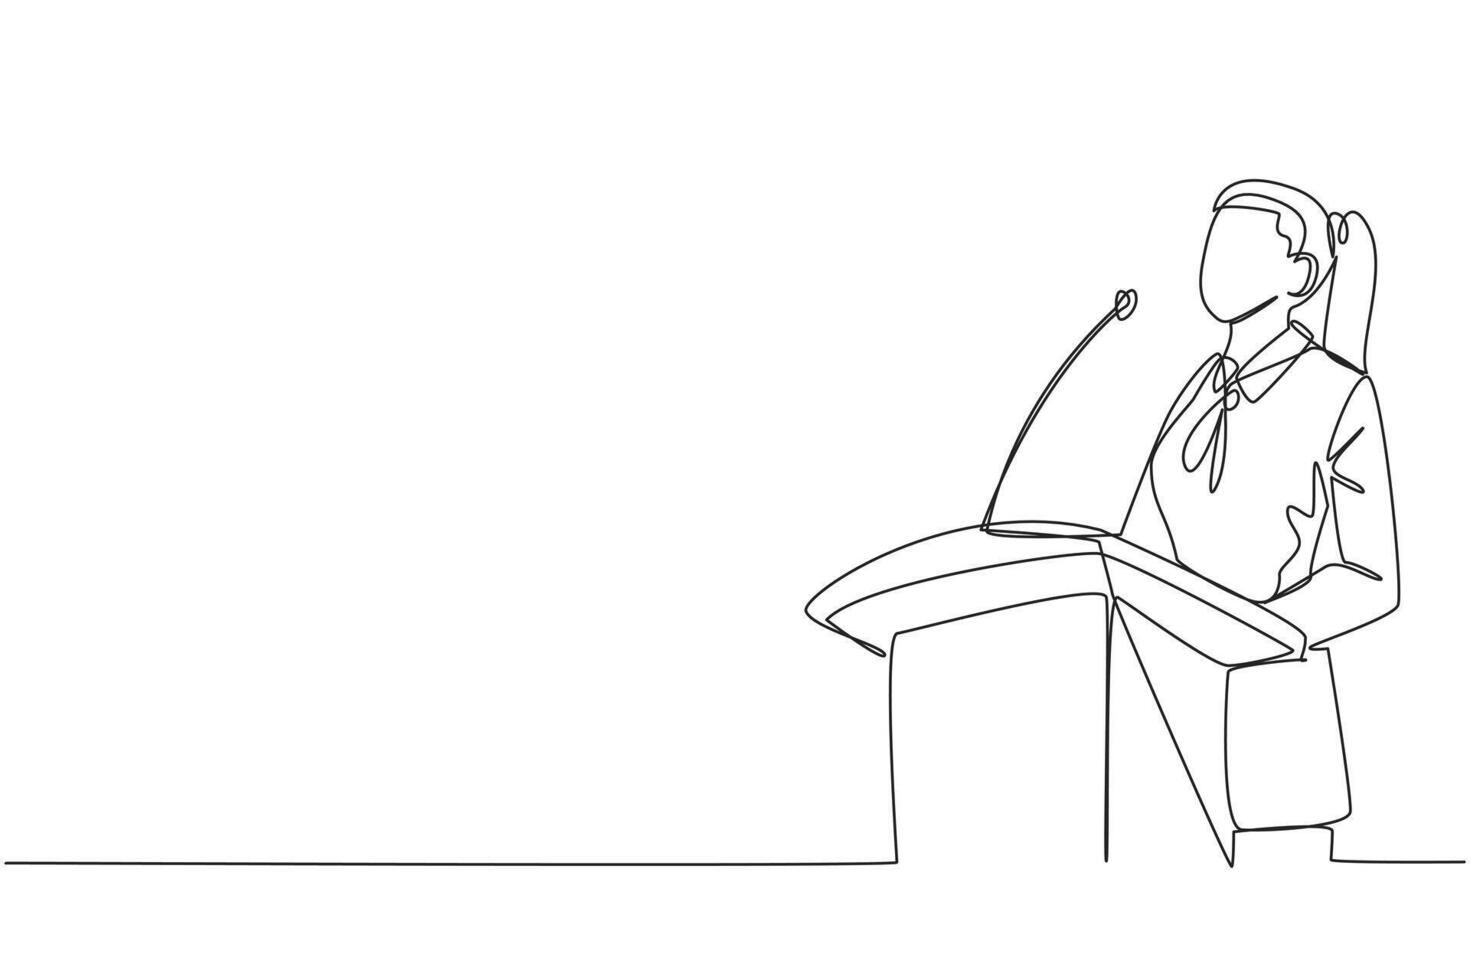 Single one line drawing young happy businesswoman speaking at the podium. Announced greatly improved business balance sheet. A fun speech for all parties. Continuous line design graphic illustration vector